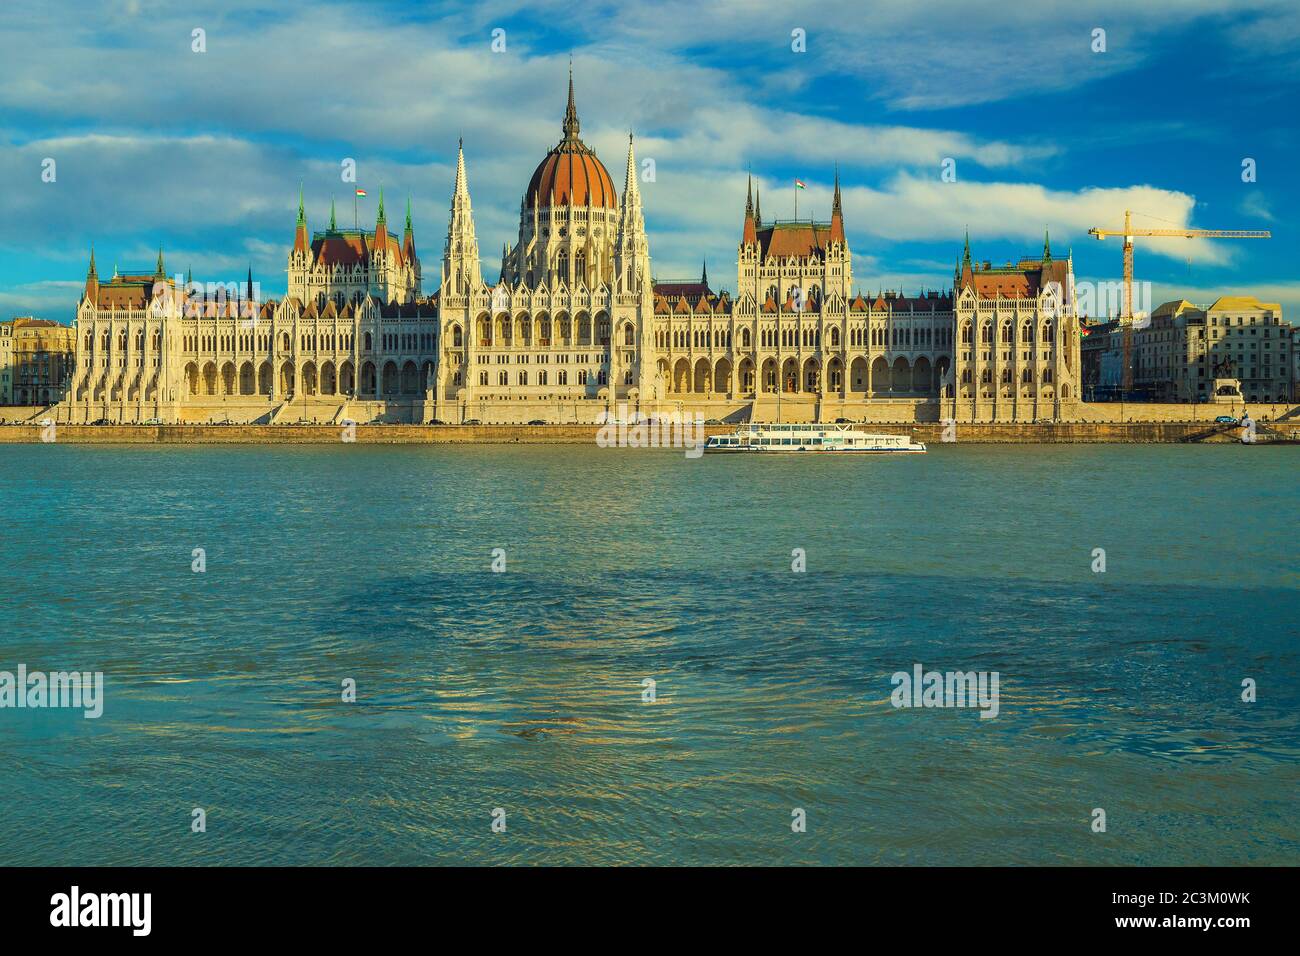 Great excursion and travel place in Budapest with famous parliament building. Sightseeing boat on Danube river in Budapest, Hungary, Europe Stock Photo